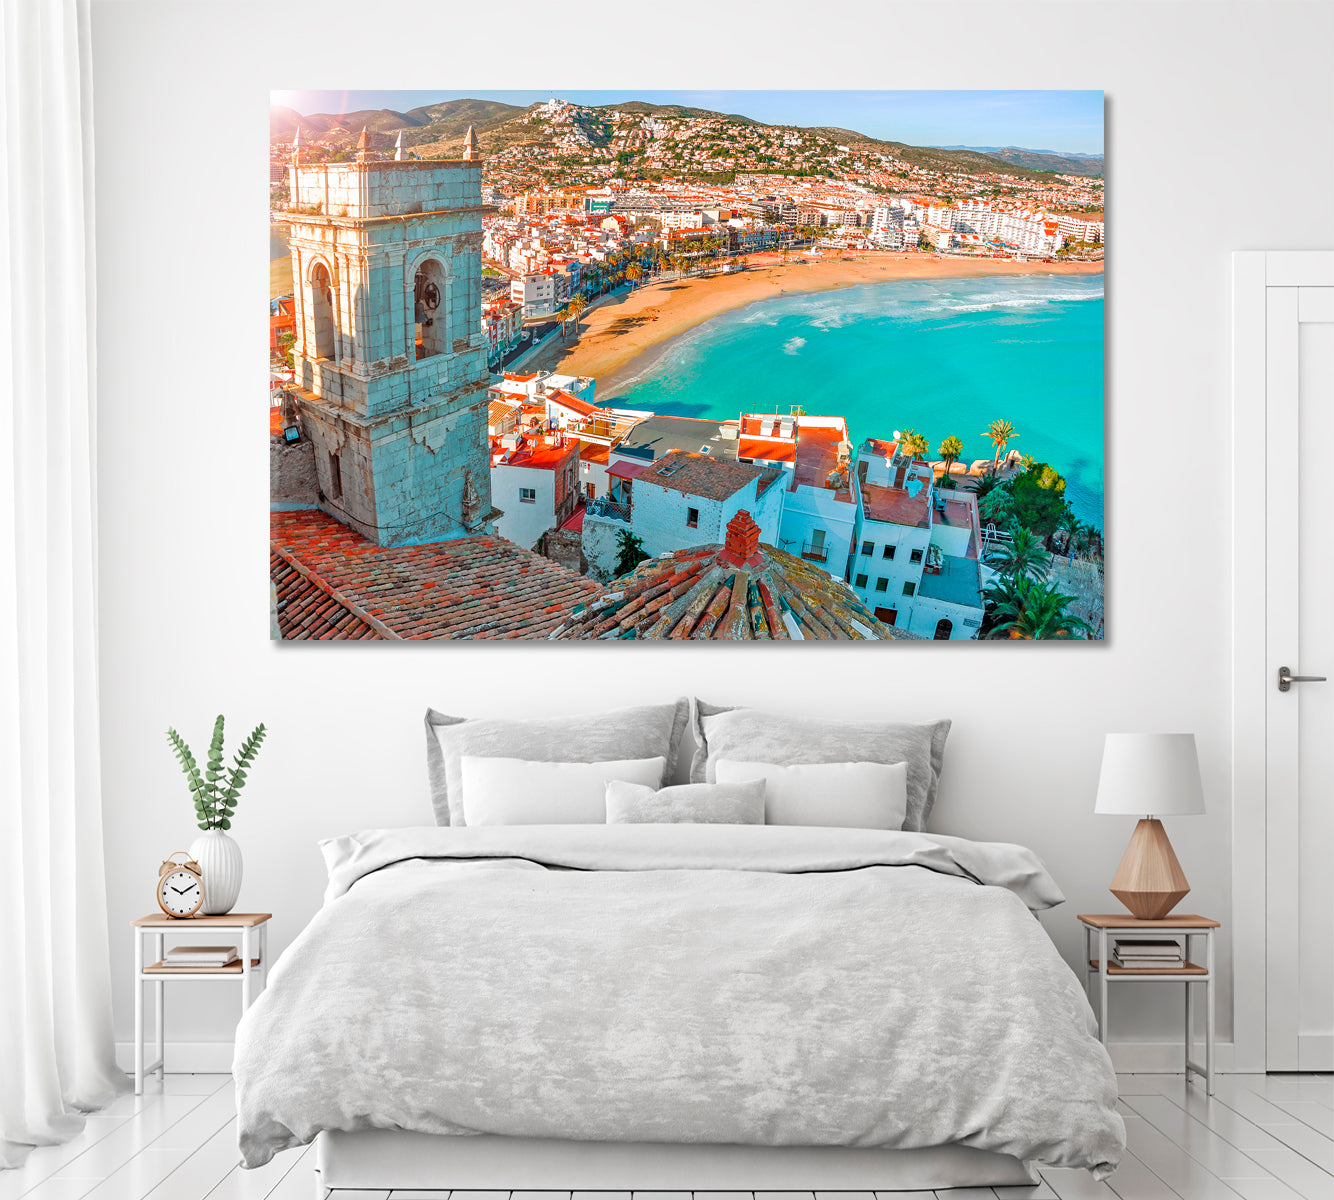 Medieval Castle of Knights Templar Valencia Spain Canvas Print ArtLexy 1 Panel 24"x16" inches 